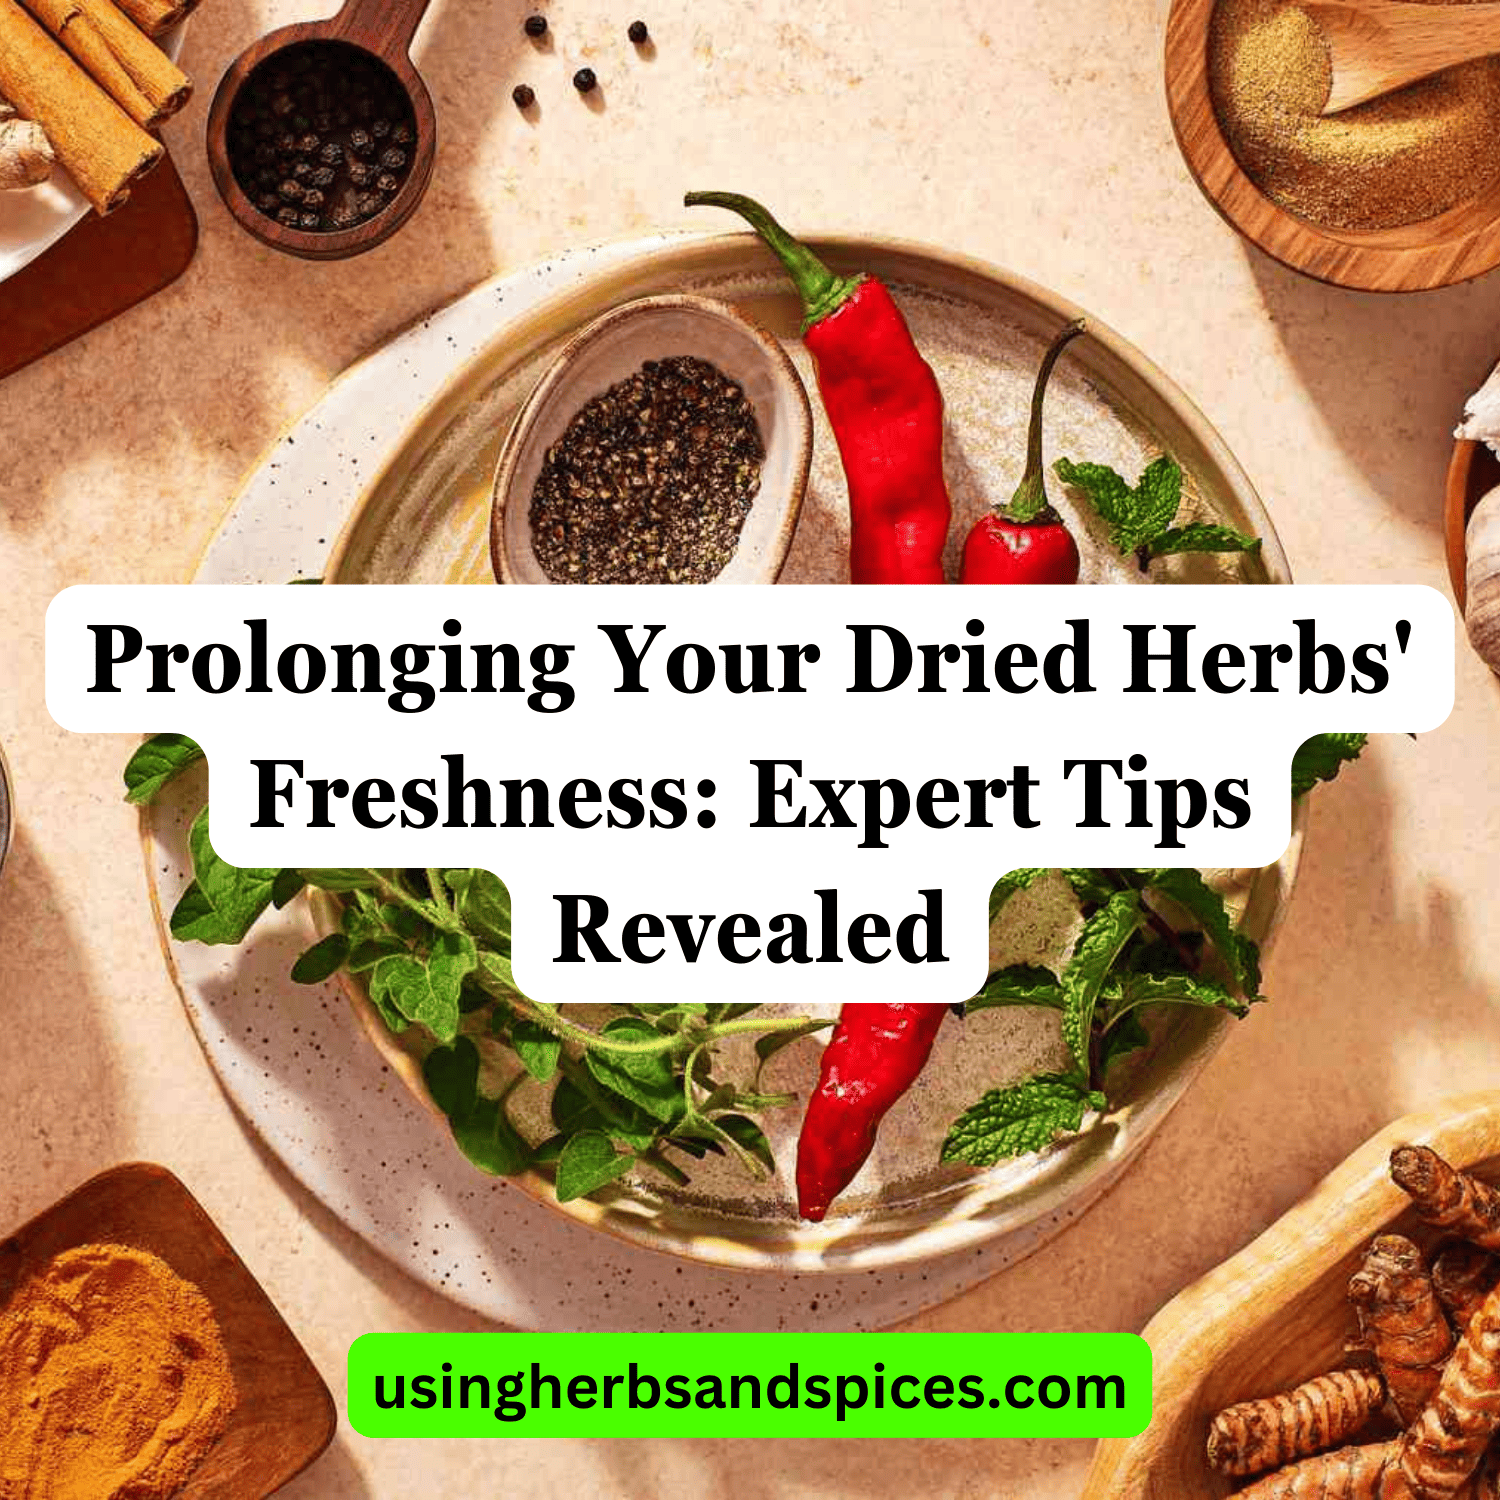 Prolonging Your Dried Herbs' Freshness: Expert Tips Revealed